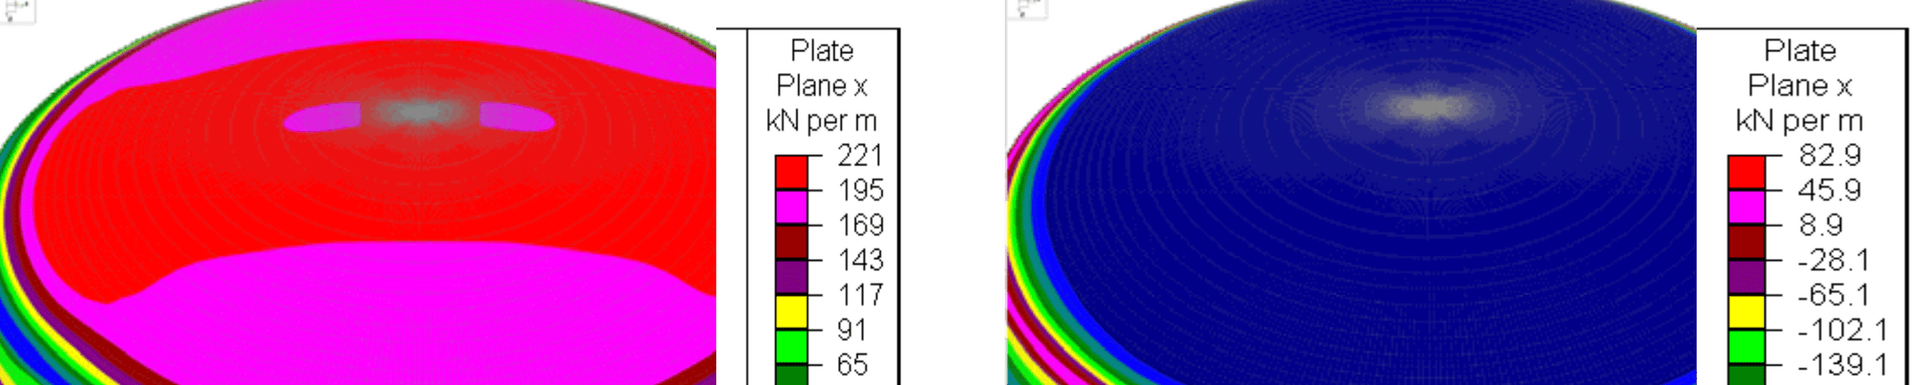 Extreme wind load analysis of Monolithic Domes